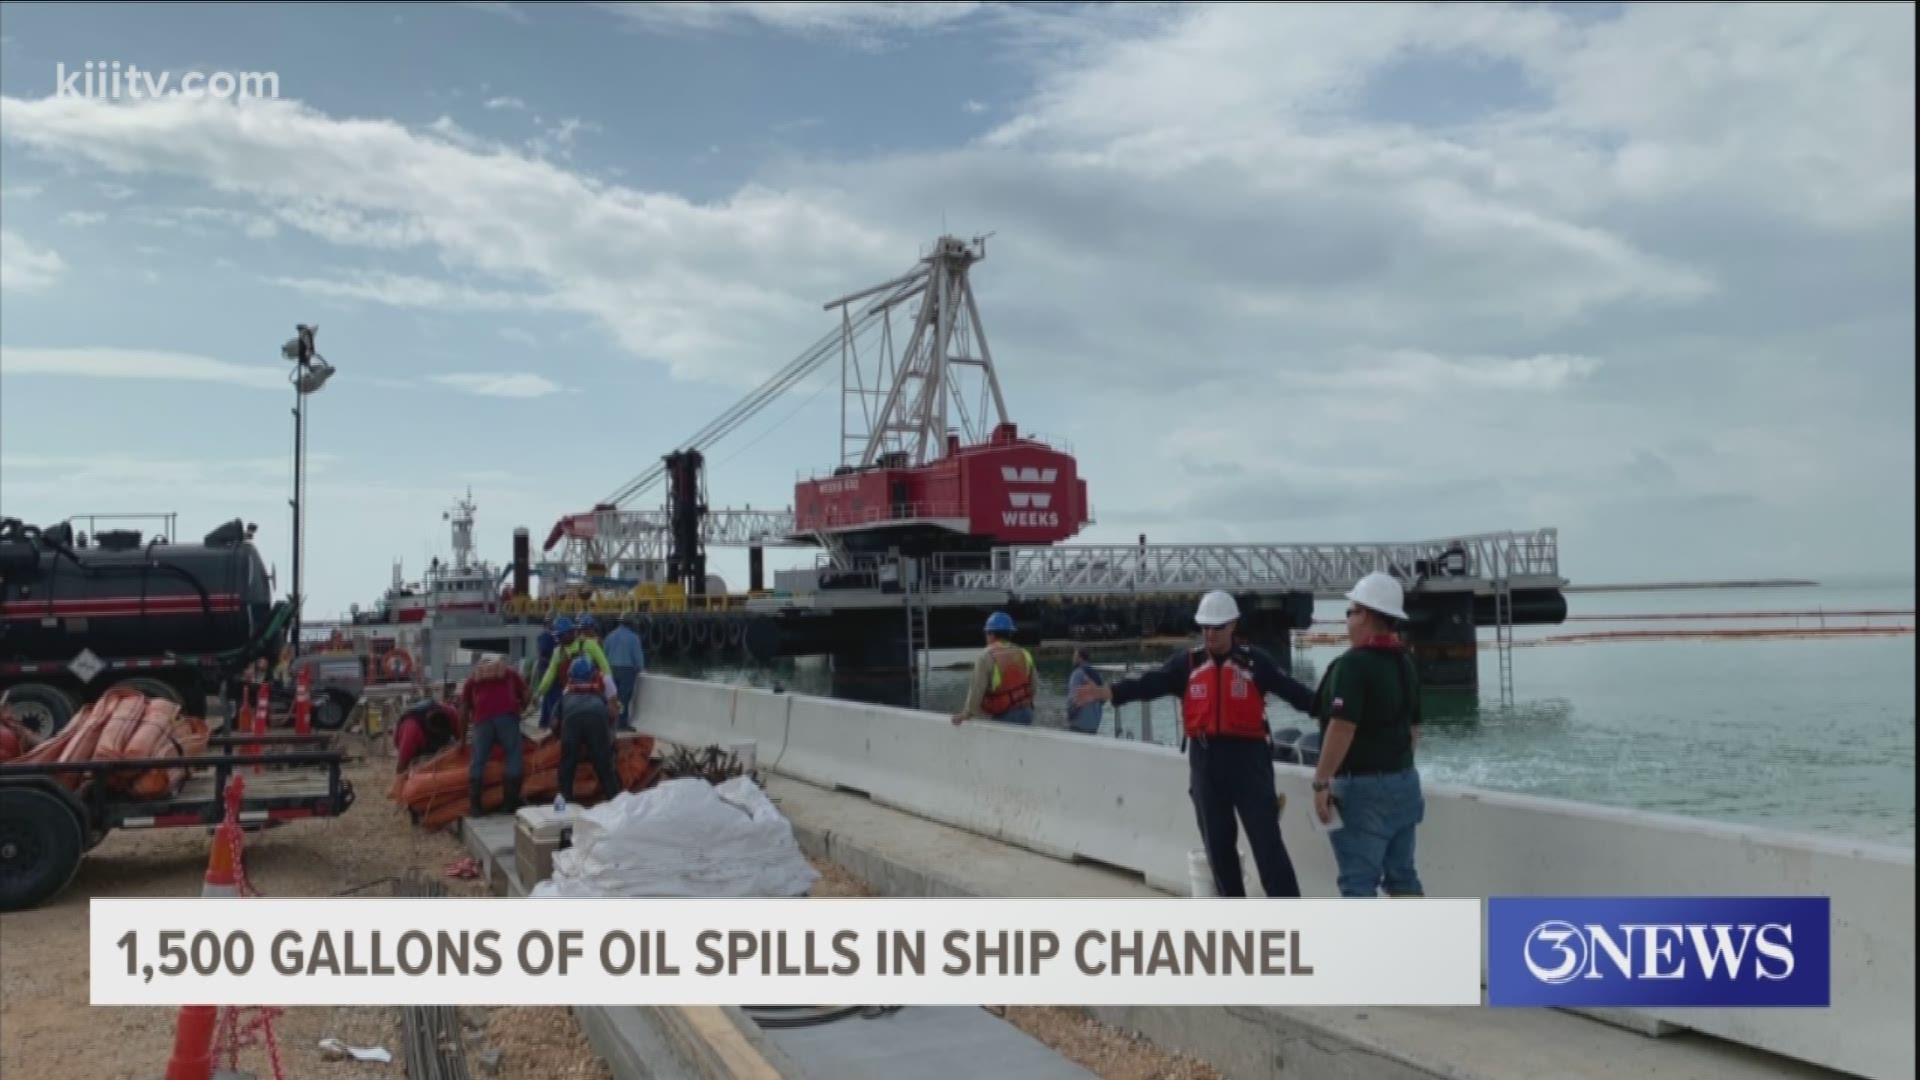 The Coast Guard is working with the Texas General Land Office to clean up an oil spill in the La Quinta Ship Channel near the Port of Corpus Christi.